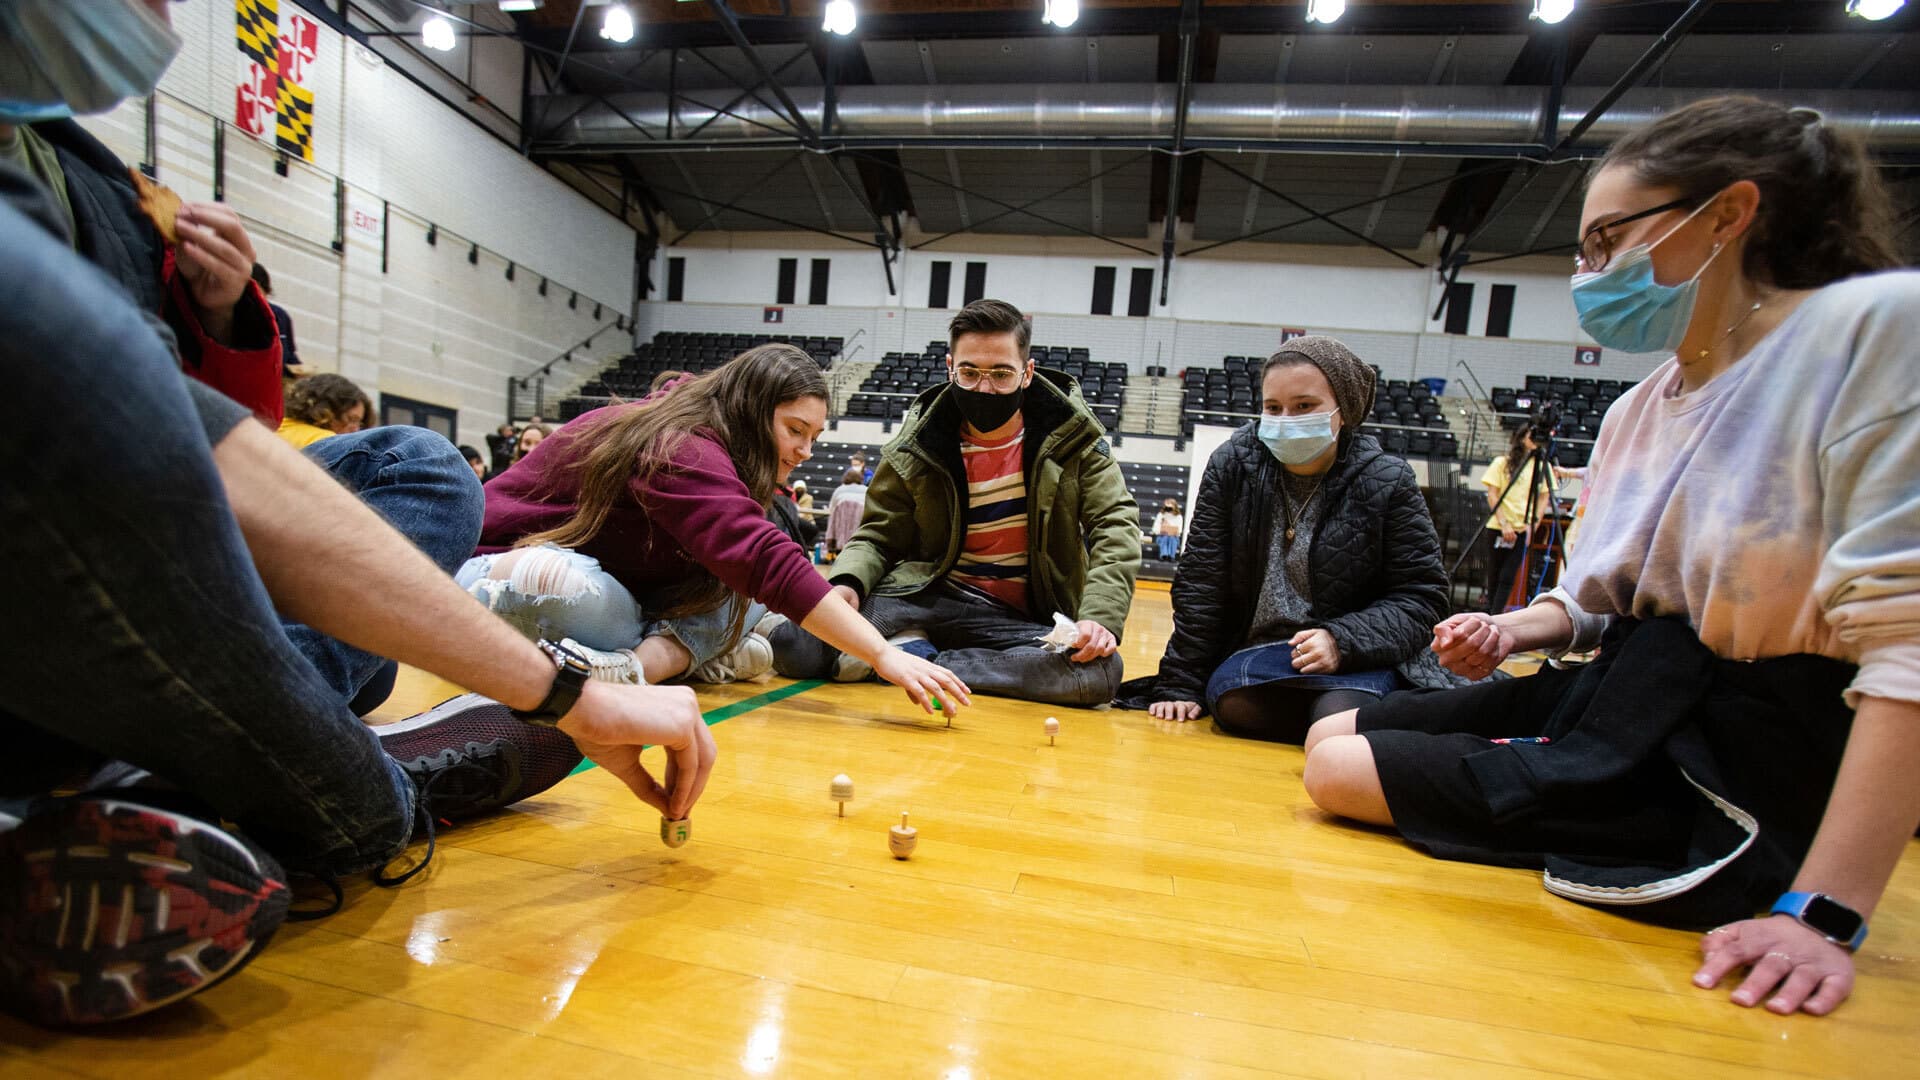 students spin dreidels at "Spin Love, Not Hate" event